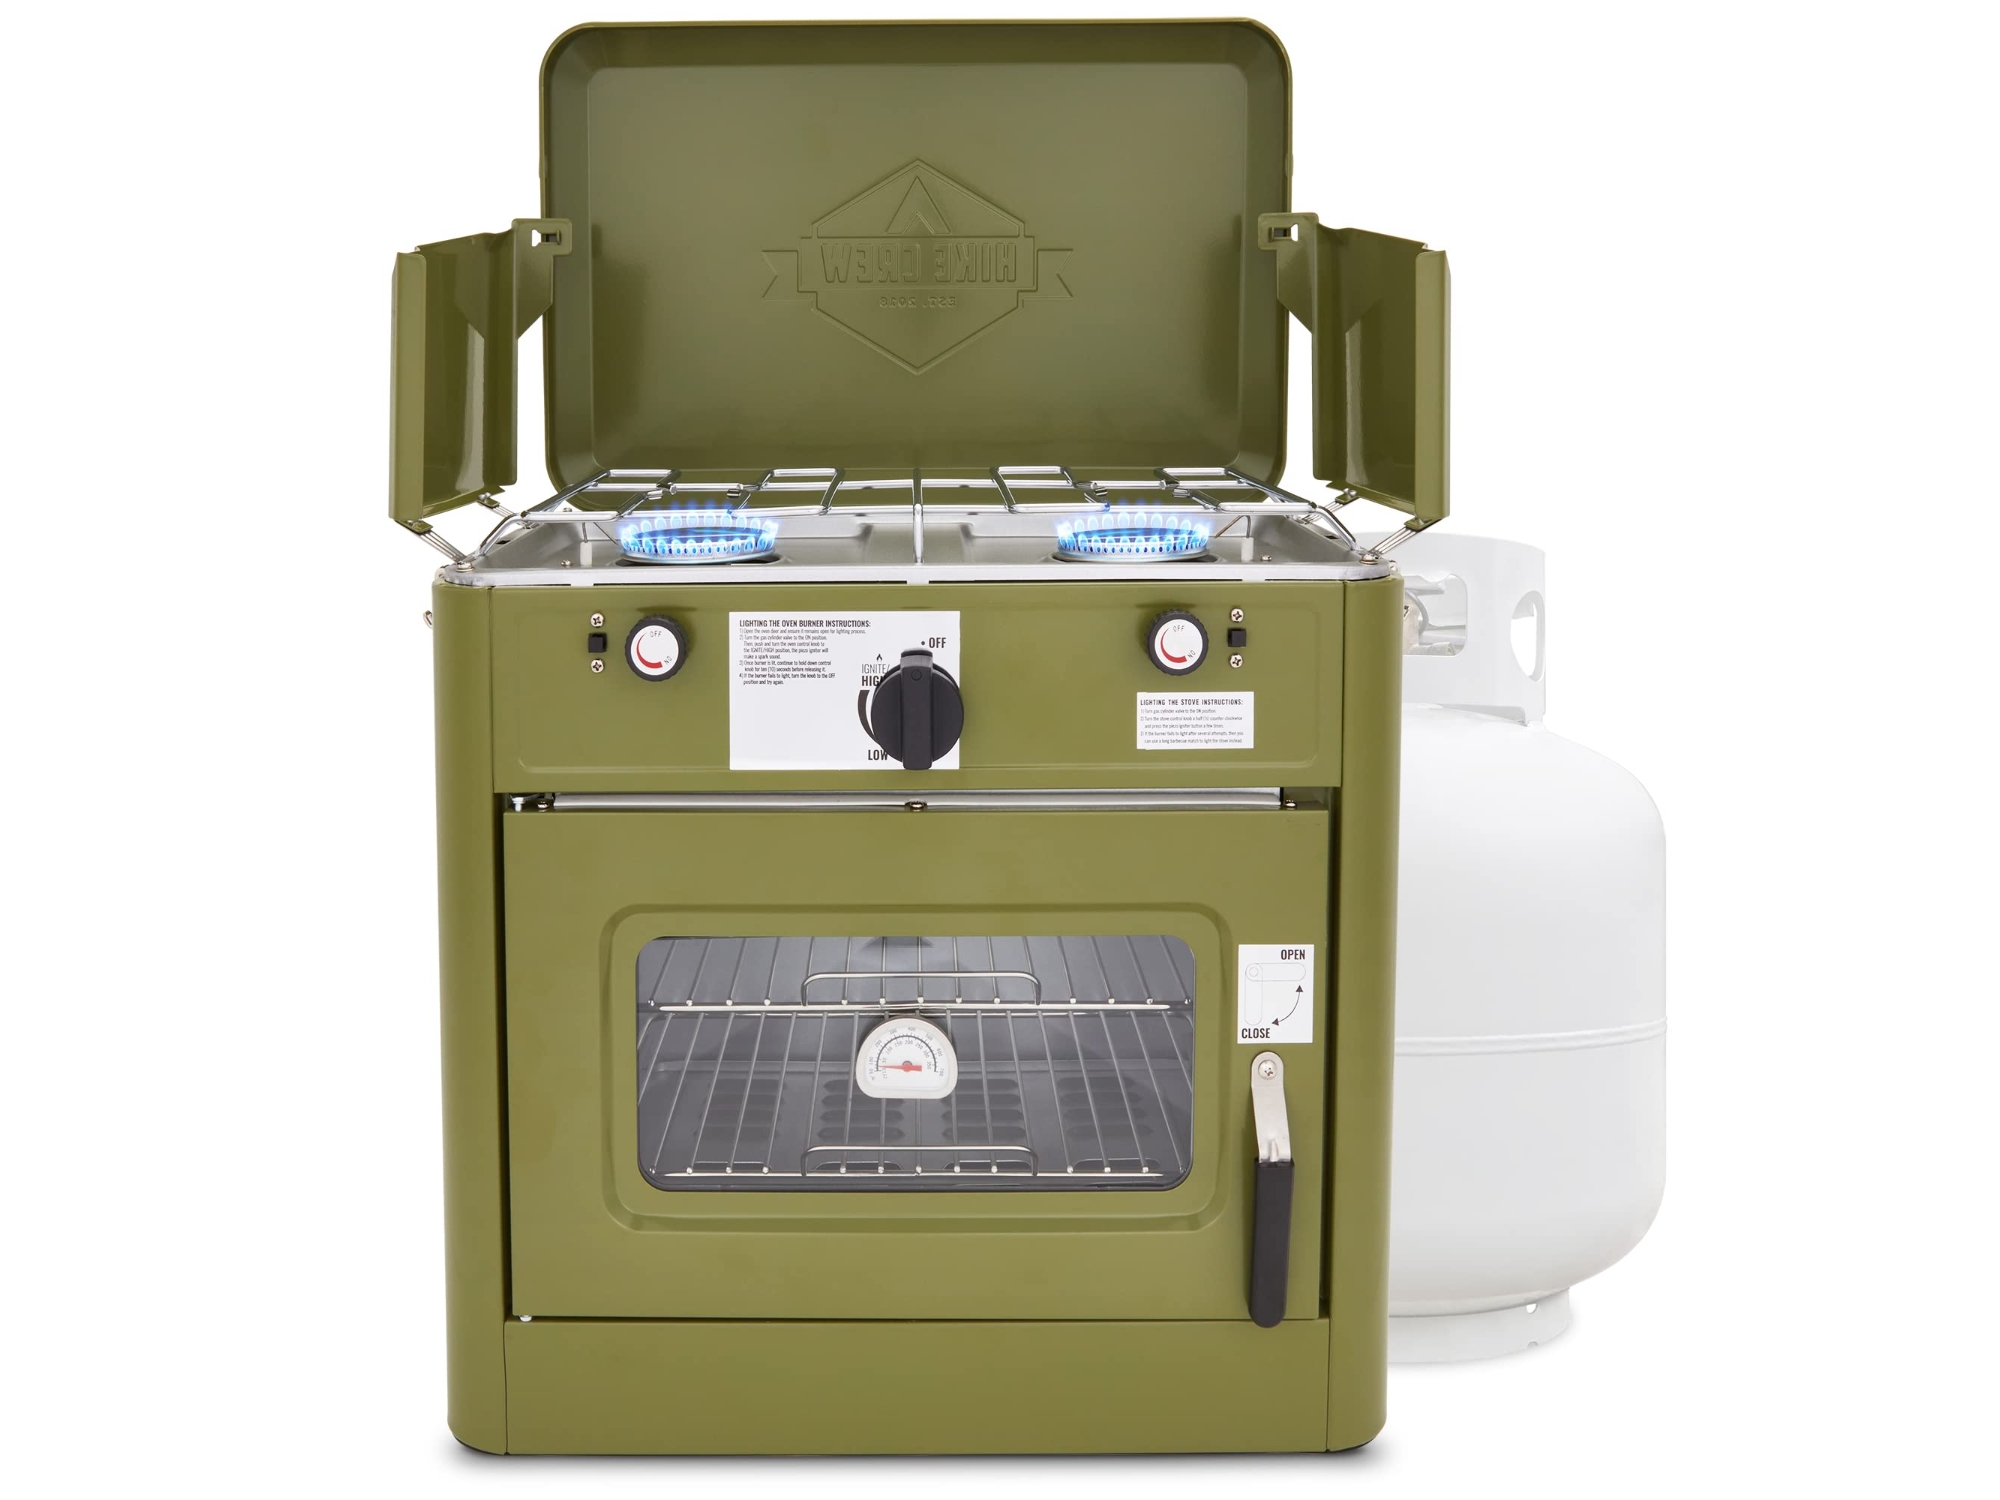 Image of Hike Crew 2-in-1 Gas Camping Portable Propane Stove & Oven with Grill Green ID 843812161848